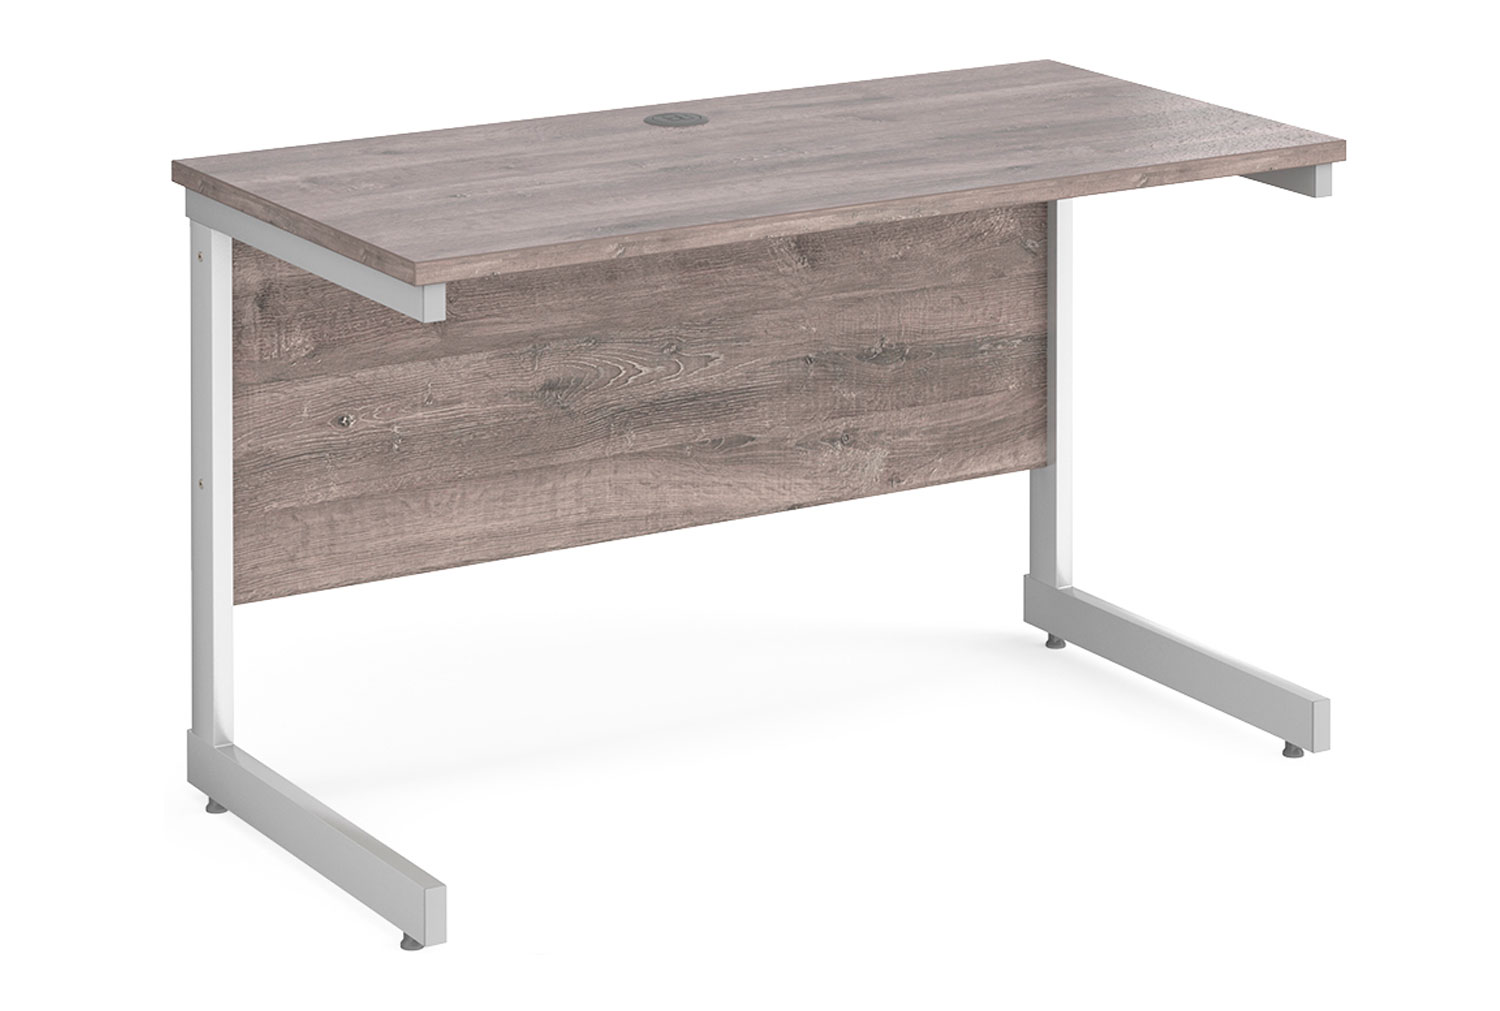 Thrifty Next-Day Narrow Rectangular Office Desk Grey Oak, 120w60dx73h (cm), Express Delivery